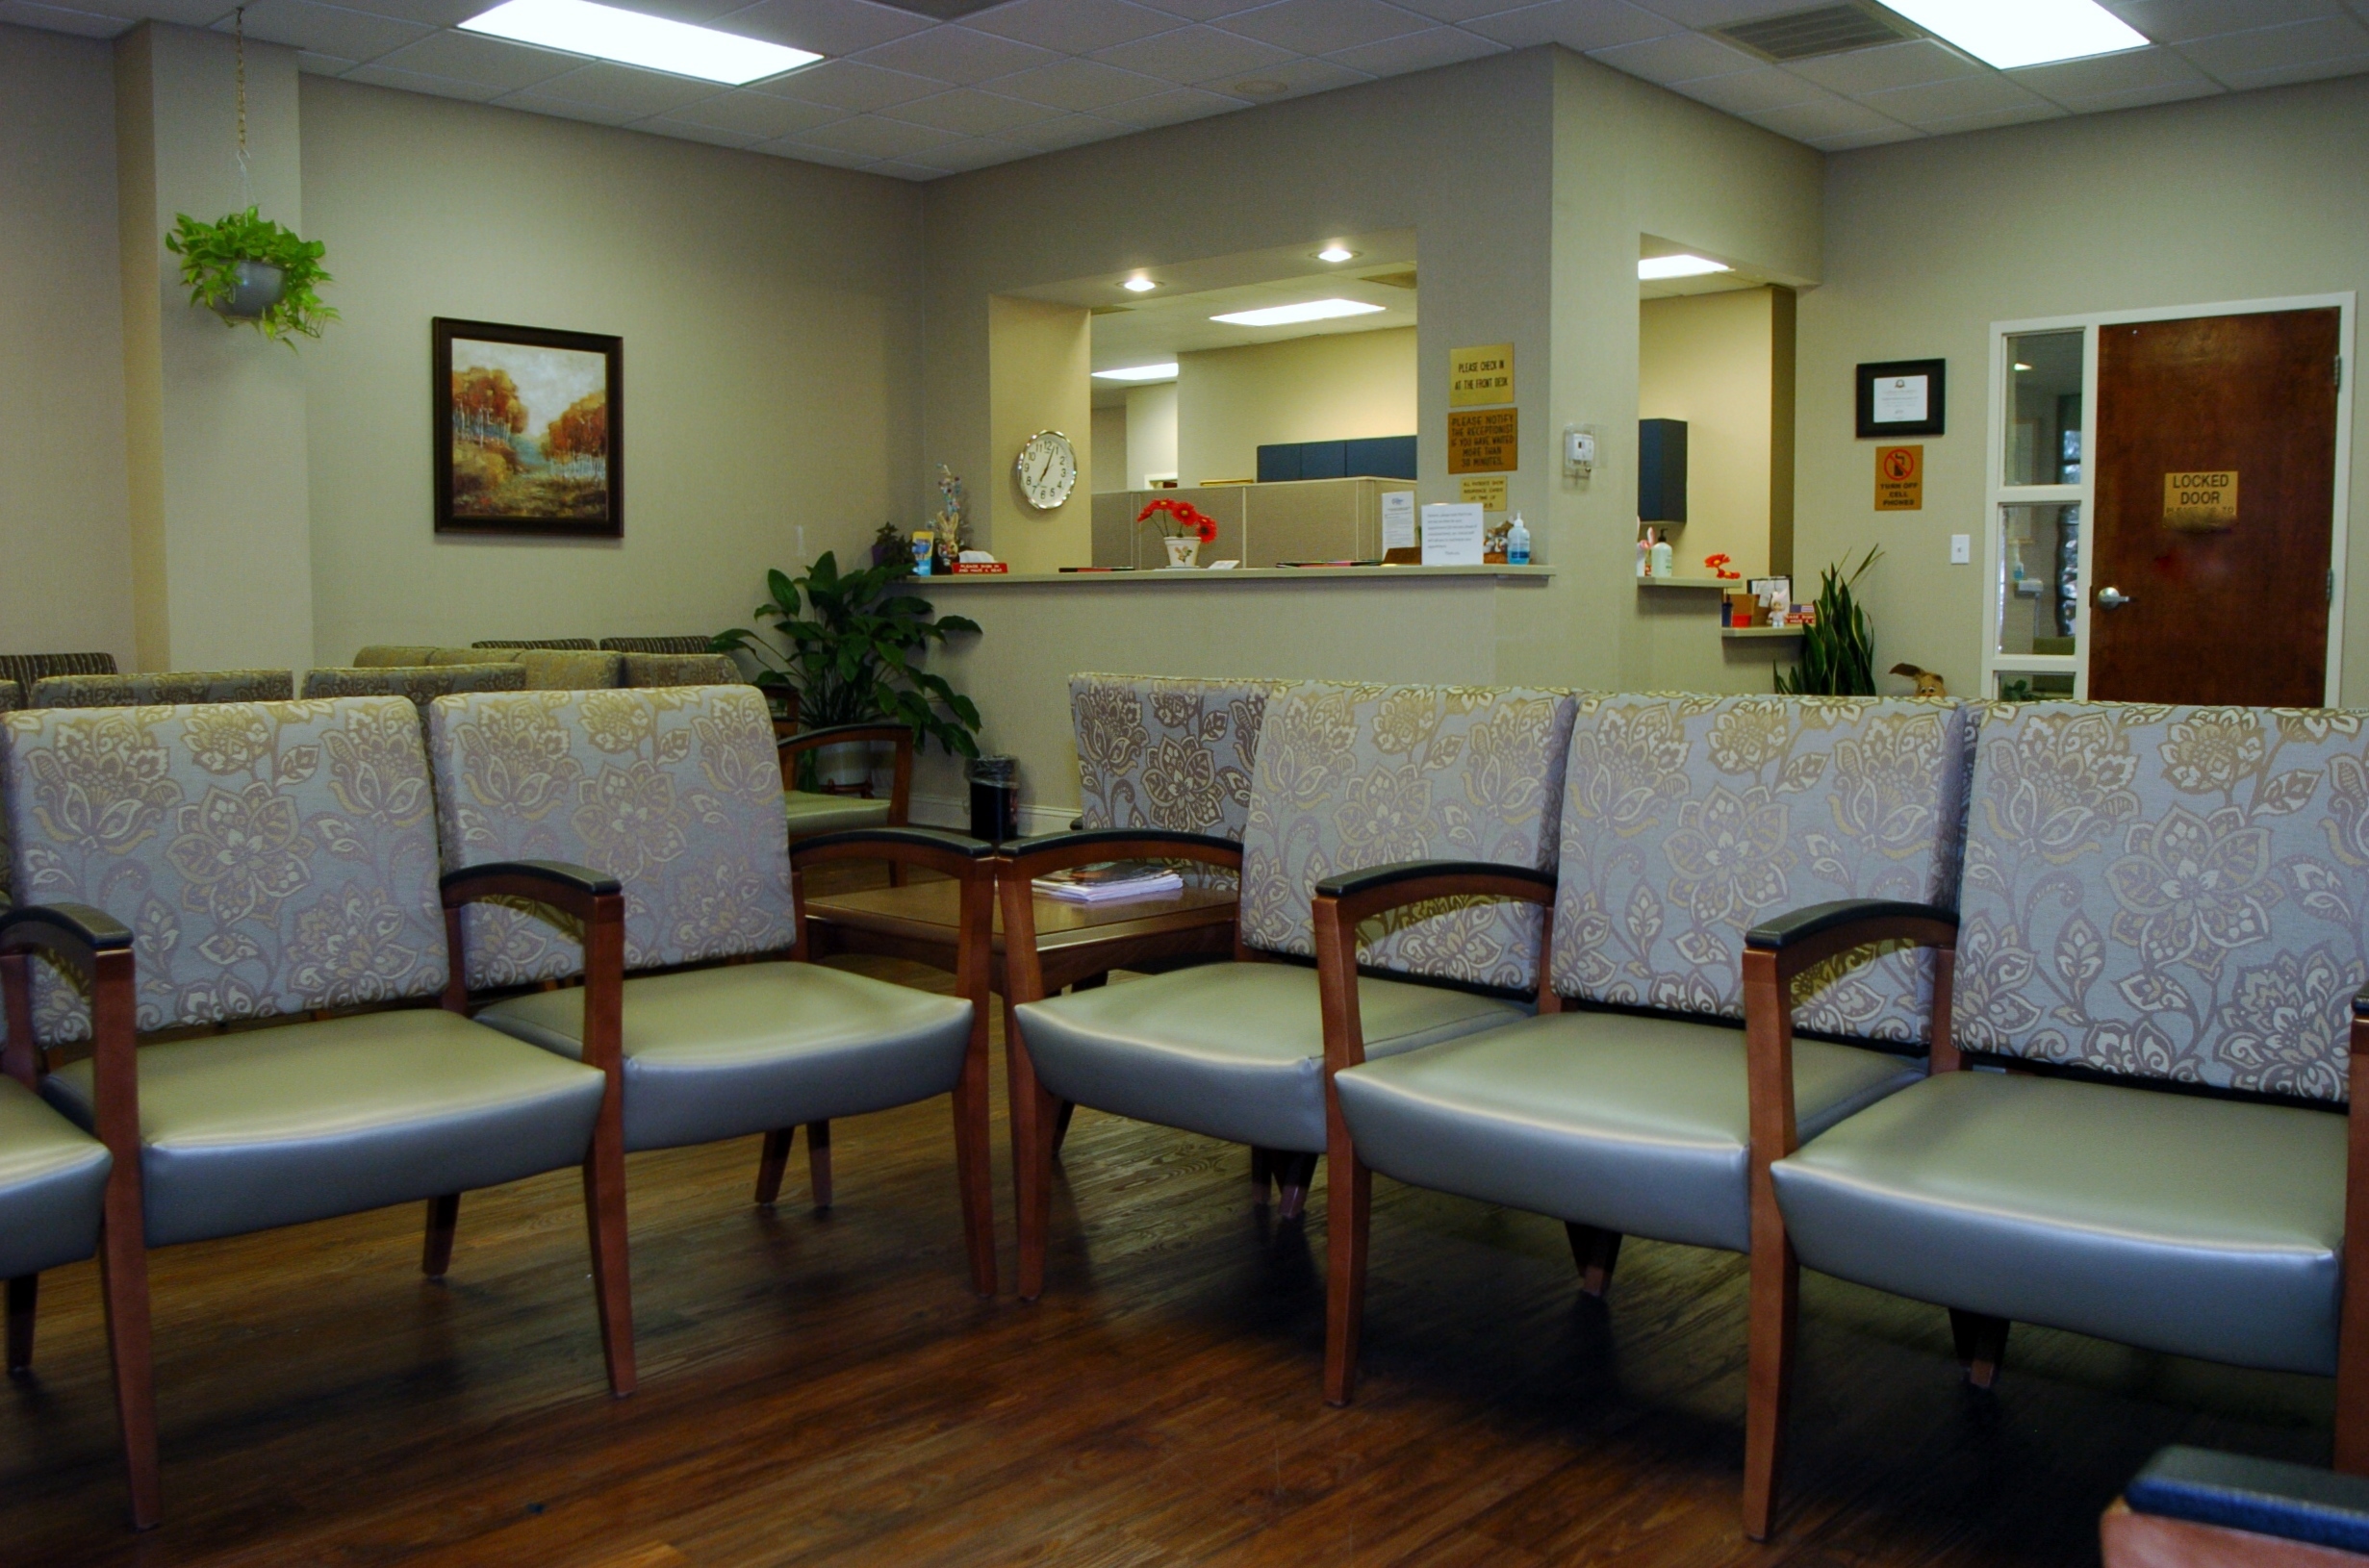 Guilford Medical Associates lobby waiting area image